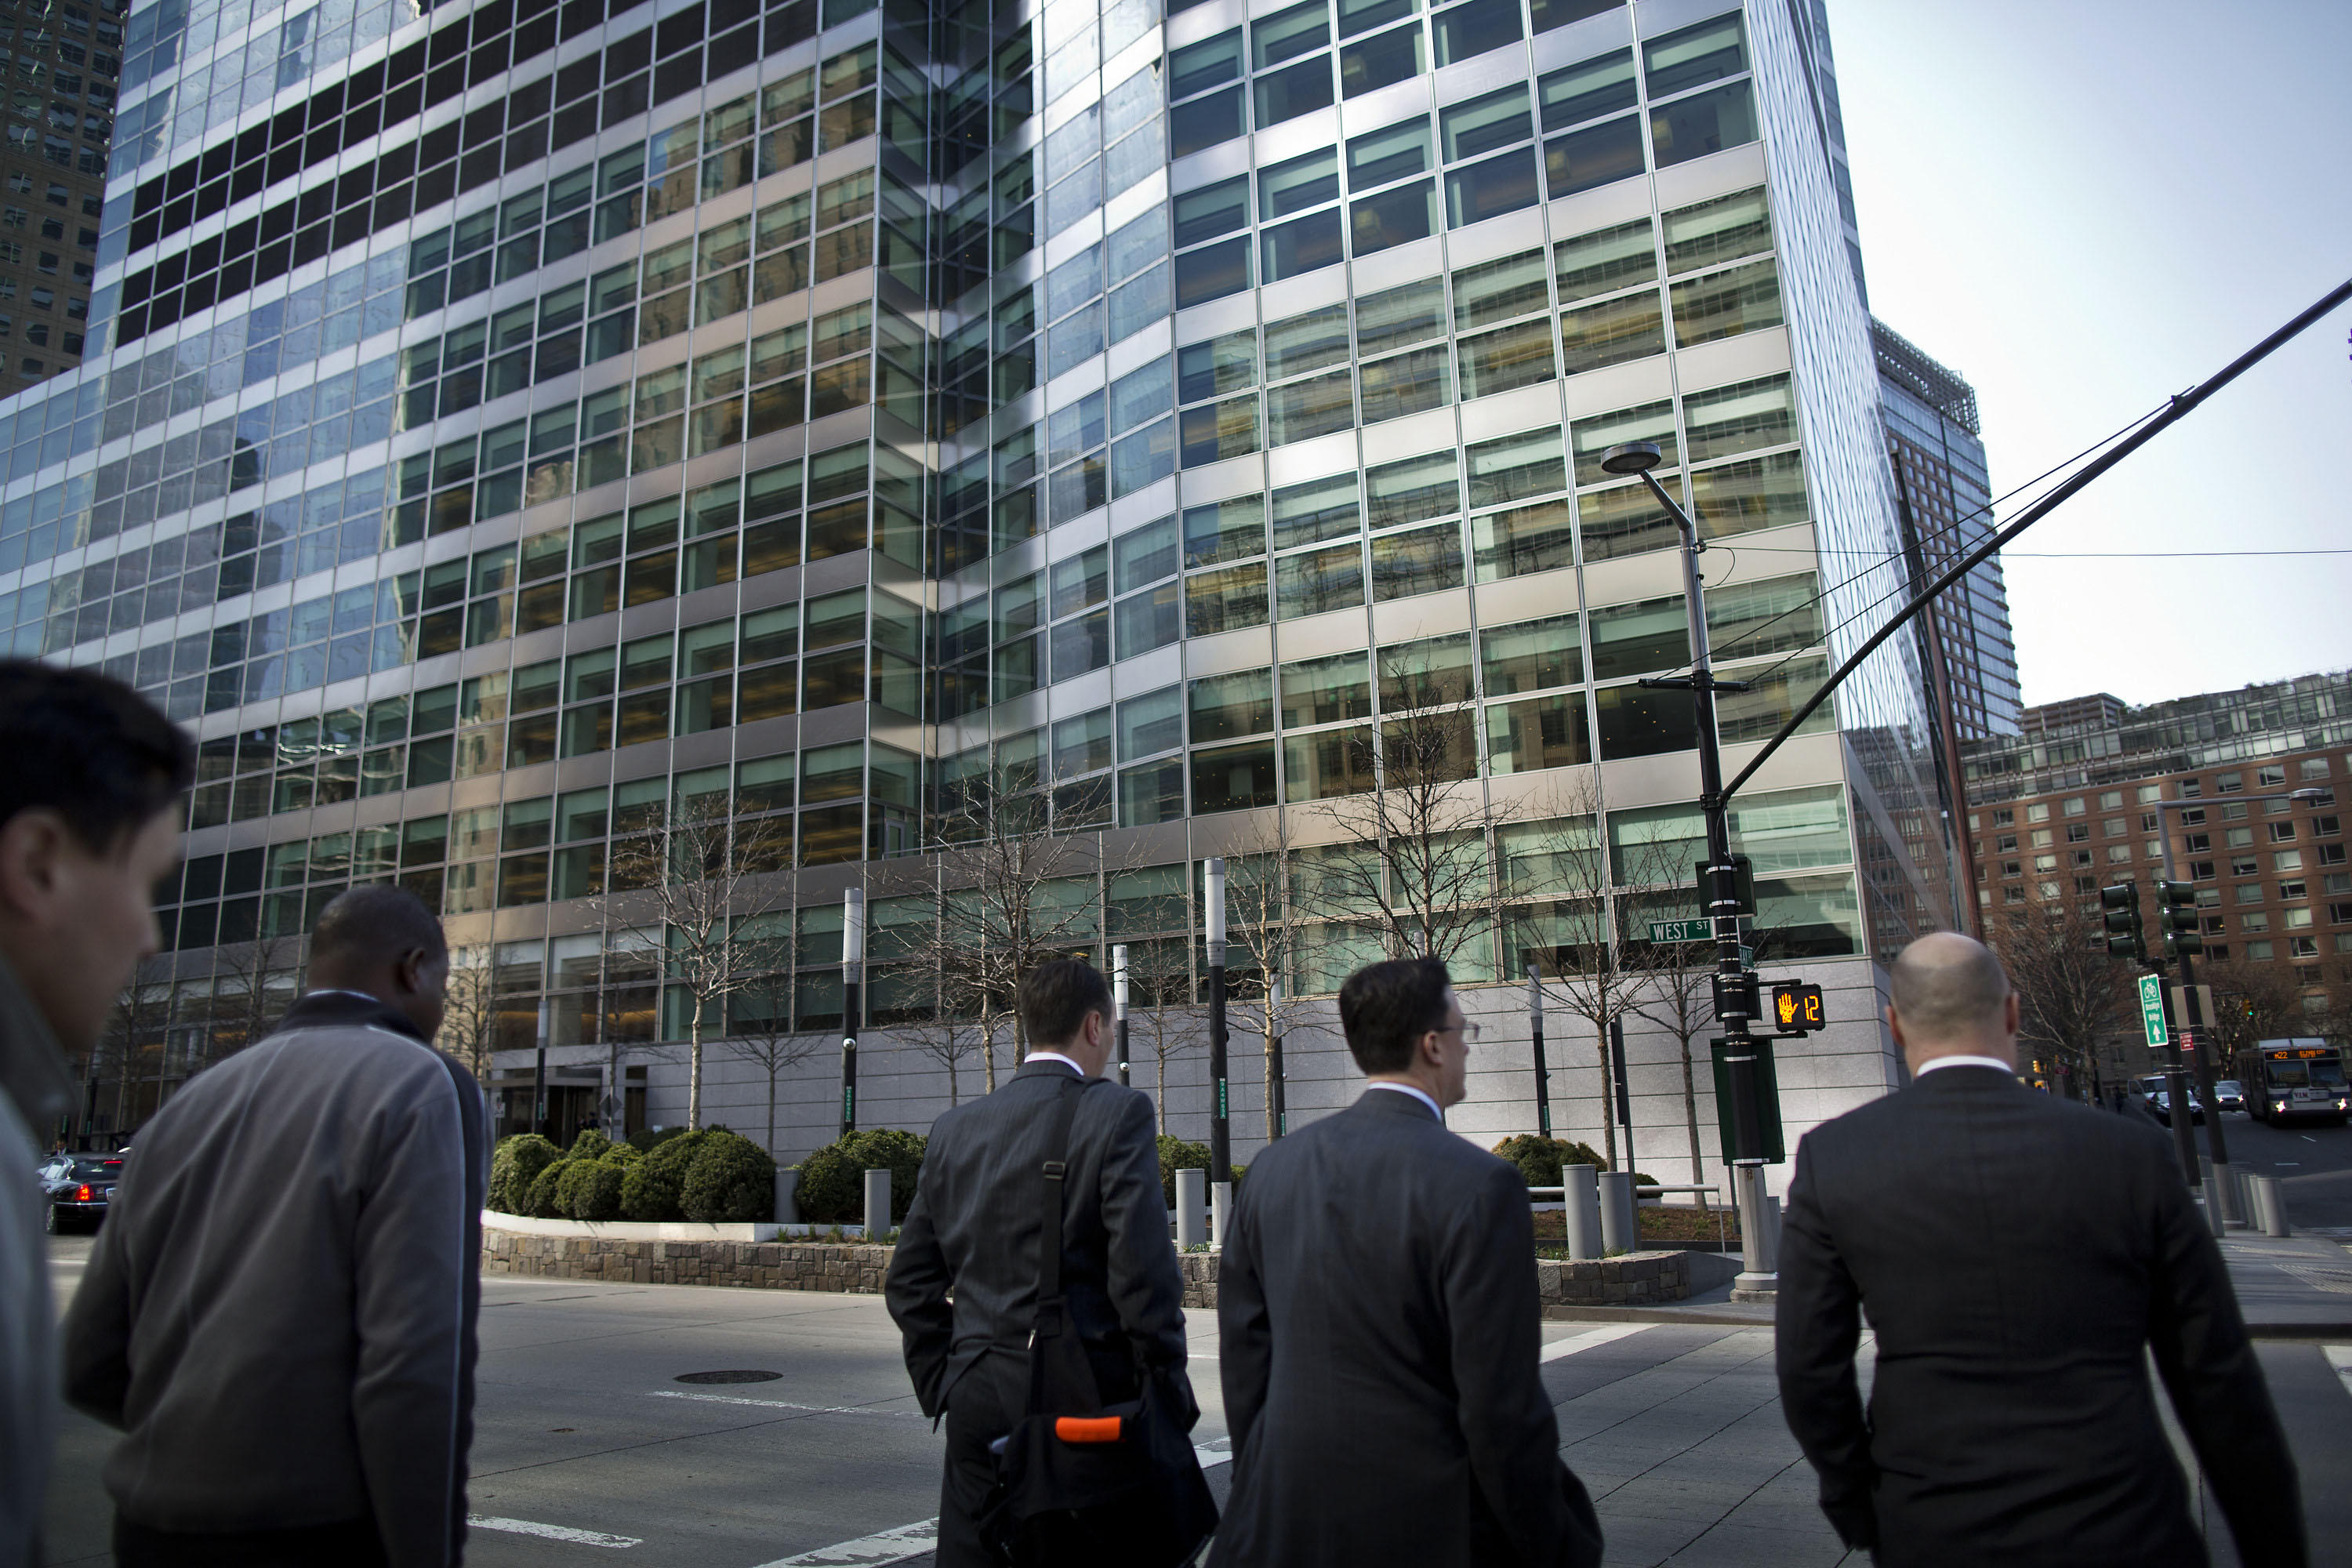 Goldman Sachs Dress Code Allows Bankers More Casual Options Bloomberg